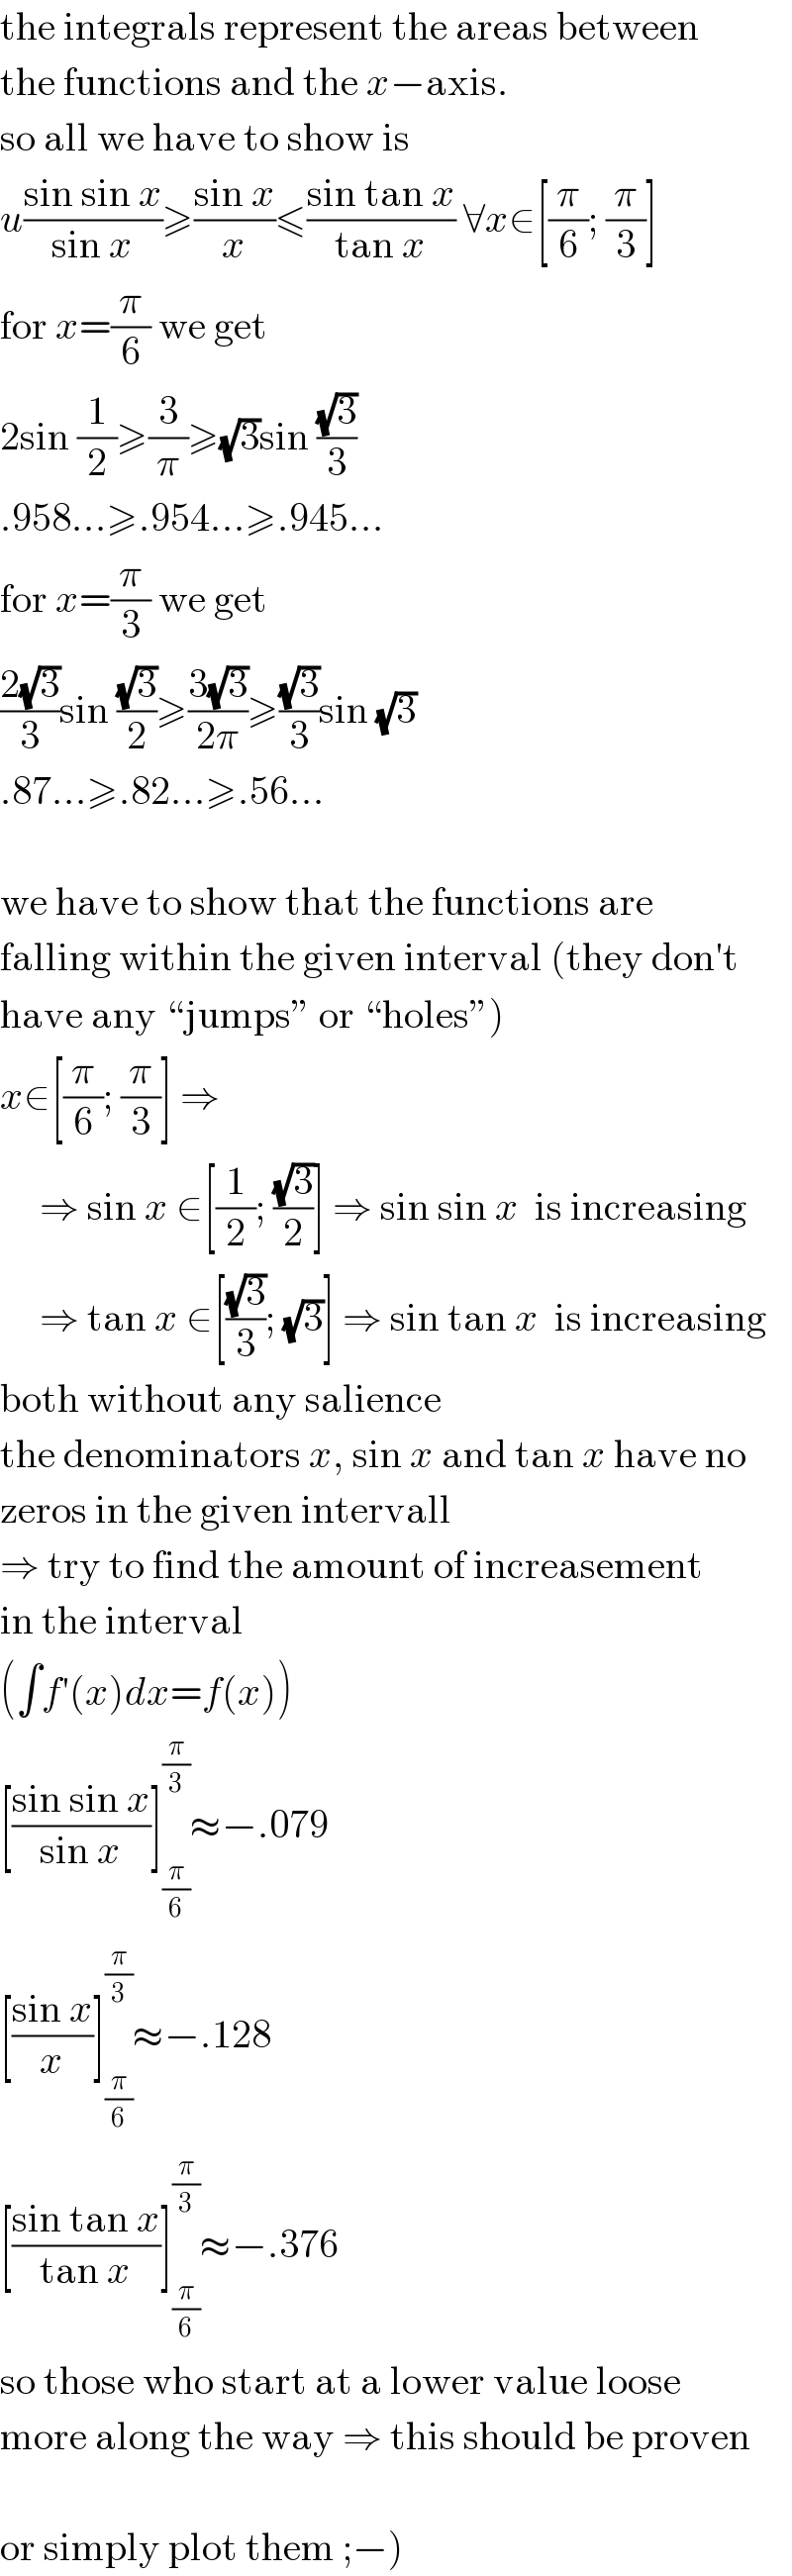 the integrals represent the areas between  the functions and the x−axis.  so all we have to show is  u((sin sin x)/(sin x))≥((sin x)/x)≤((sin tan x)/(tan x)) ∀x∈[(π/6); (π/3)]  for x=(π/6) we get  2sin (1/2)≥(3/π)≥(√3)sin ((√3)/3)  .958...≥.954...≥.945...  for x=(π/3) we get  ((2(√3))/3)sin ((√3)/2)≥((3(√3))/(2π))≥((√3)/3)sin (√3)  .87...≥.82...≥.56...    we have to show that the functions are  falling within the given interval (they don′t  have any ♮jumpsε or ♮holesε)  x∈[(π/6); (π/3)] ⇒       ⇒ sin x ∈[(1/2); ((√3)/2)] ⇒ sin sin x  is increasing       ⇒ tan x ∈[((√3)/3); (√3)] ⇒ sin tan x  is increasing  both without any salience  the denominators x, sin x and tan x have no  zeros in the given intervall  ⇒ try to find the amount of increasement  in the interval  (∫f′(x)dx=f(x))  [((sin sin x)/(sin x))]_(π/6) ^(π/3) ≈−.079  [((sin x)/x)]_(π/6) ^(π/3) ≈−.128  [((sin tan x)/(tan x))]_(π/6) ^(π/3) ≈−.376  so those who start at a lower value loose  more along the way ⇒ this should be proven    or simply plot them ;−)  